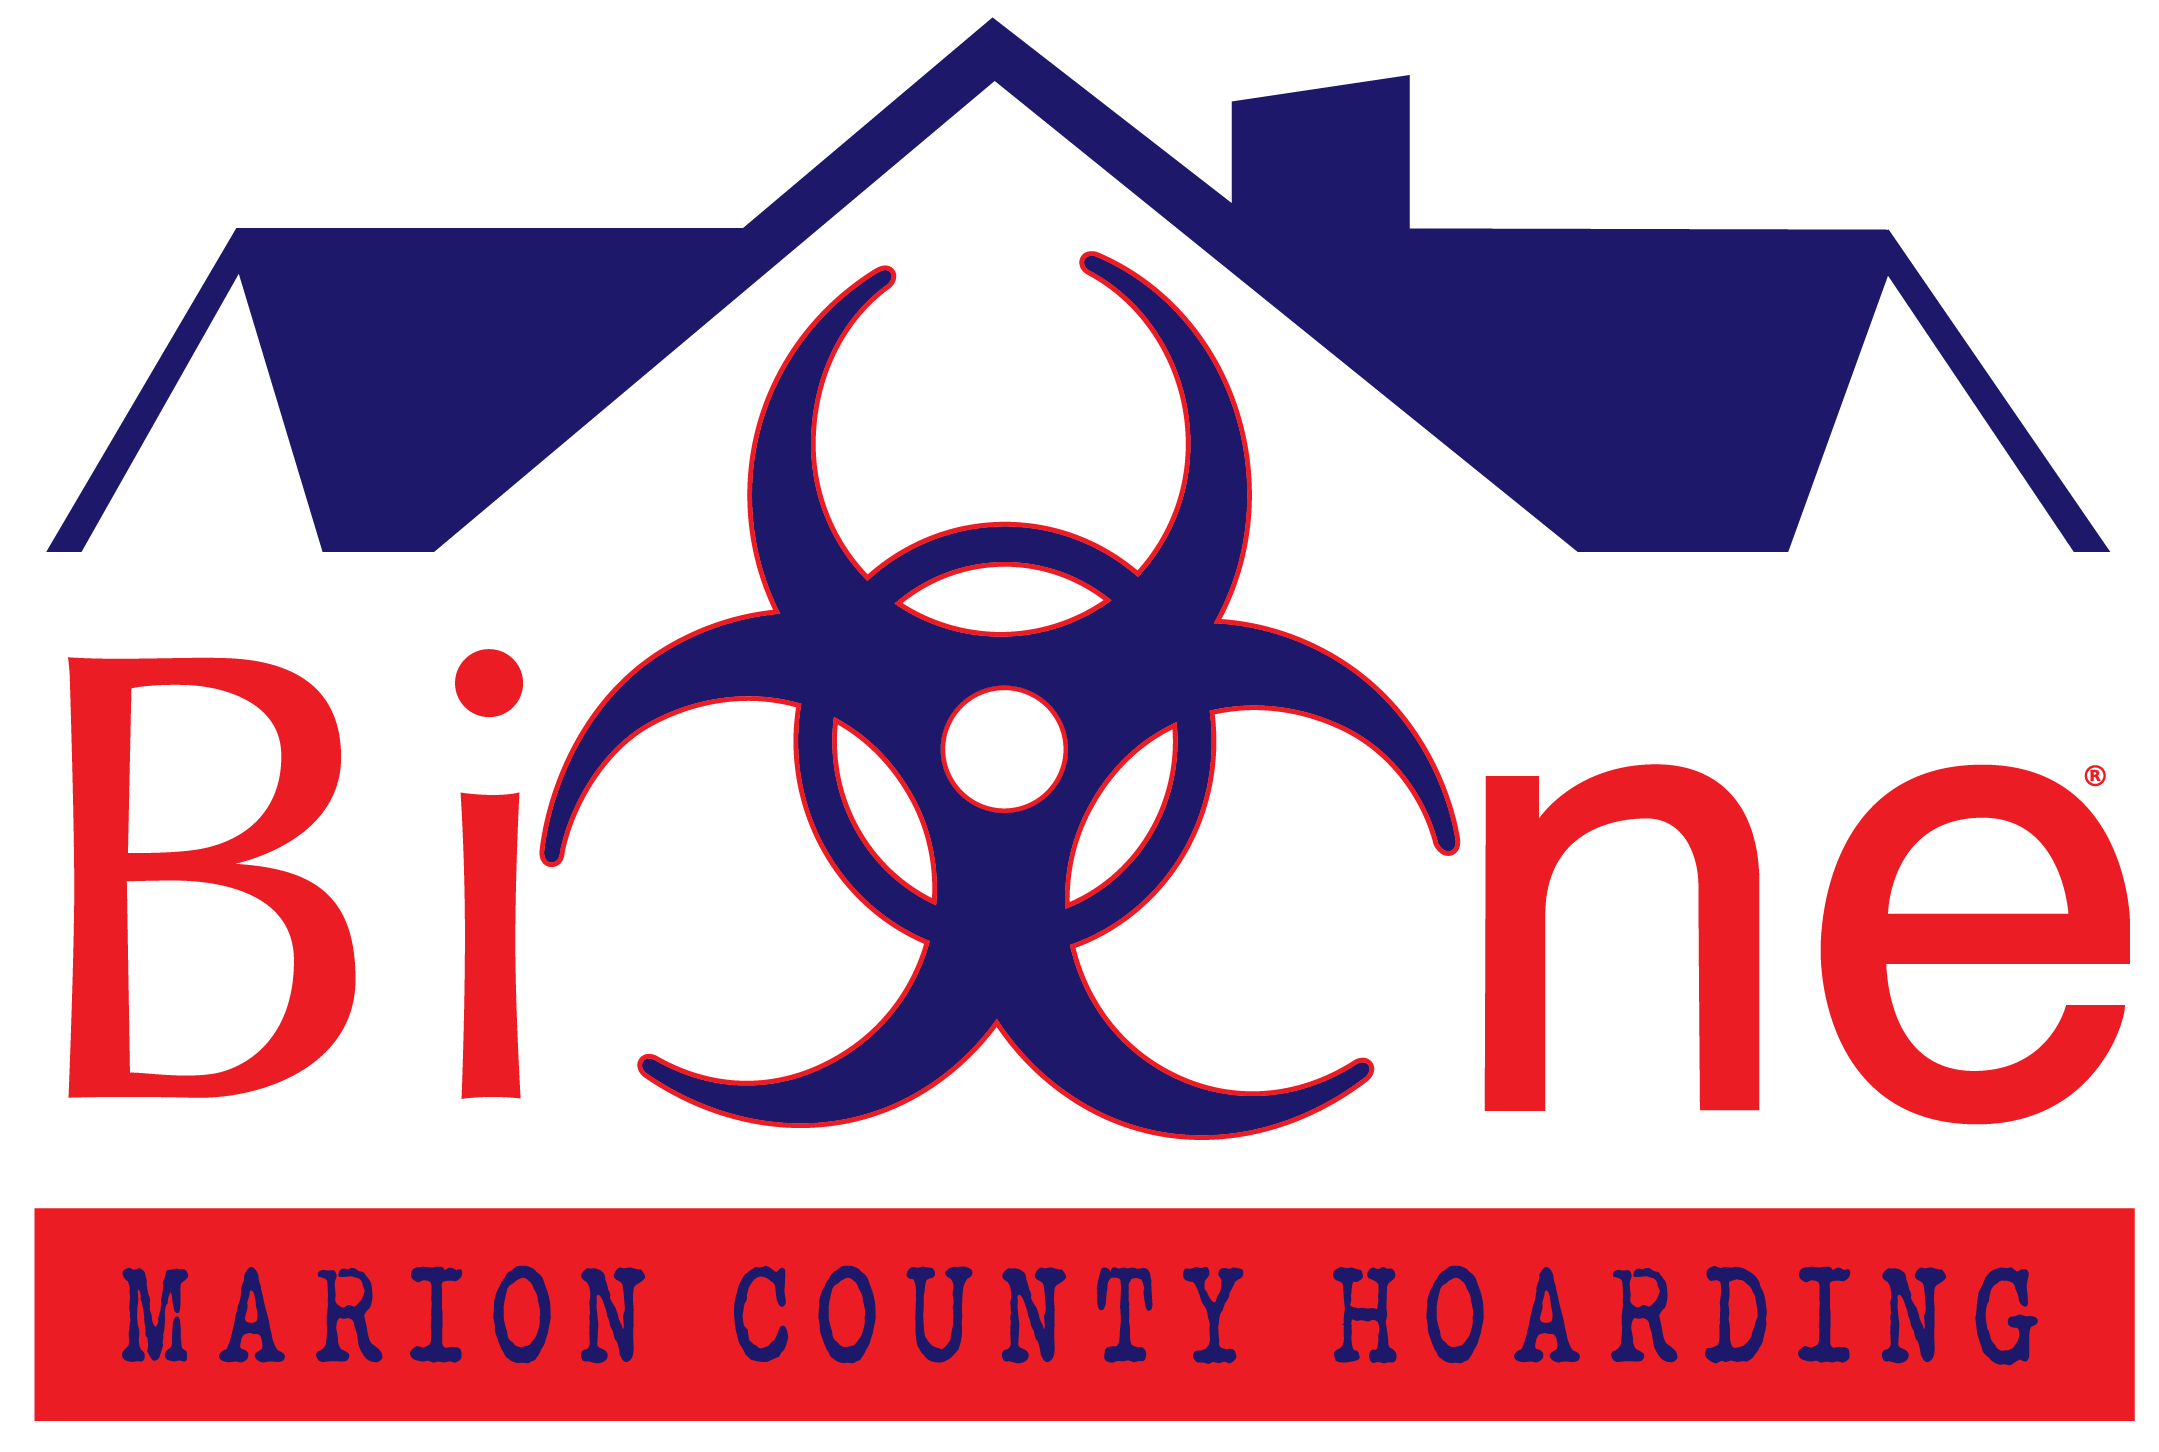 Marion County Hoarding